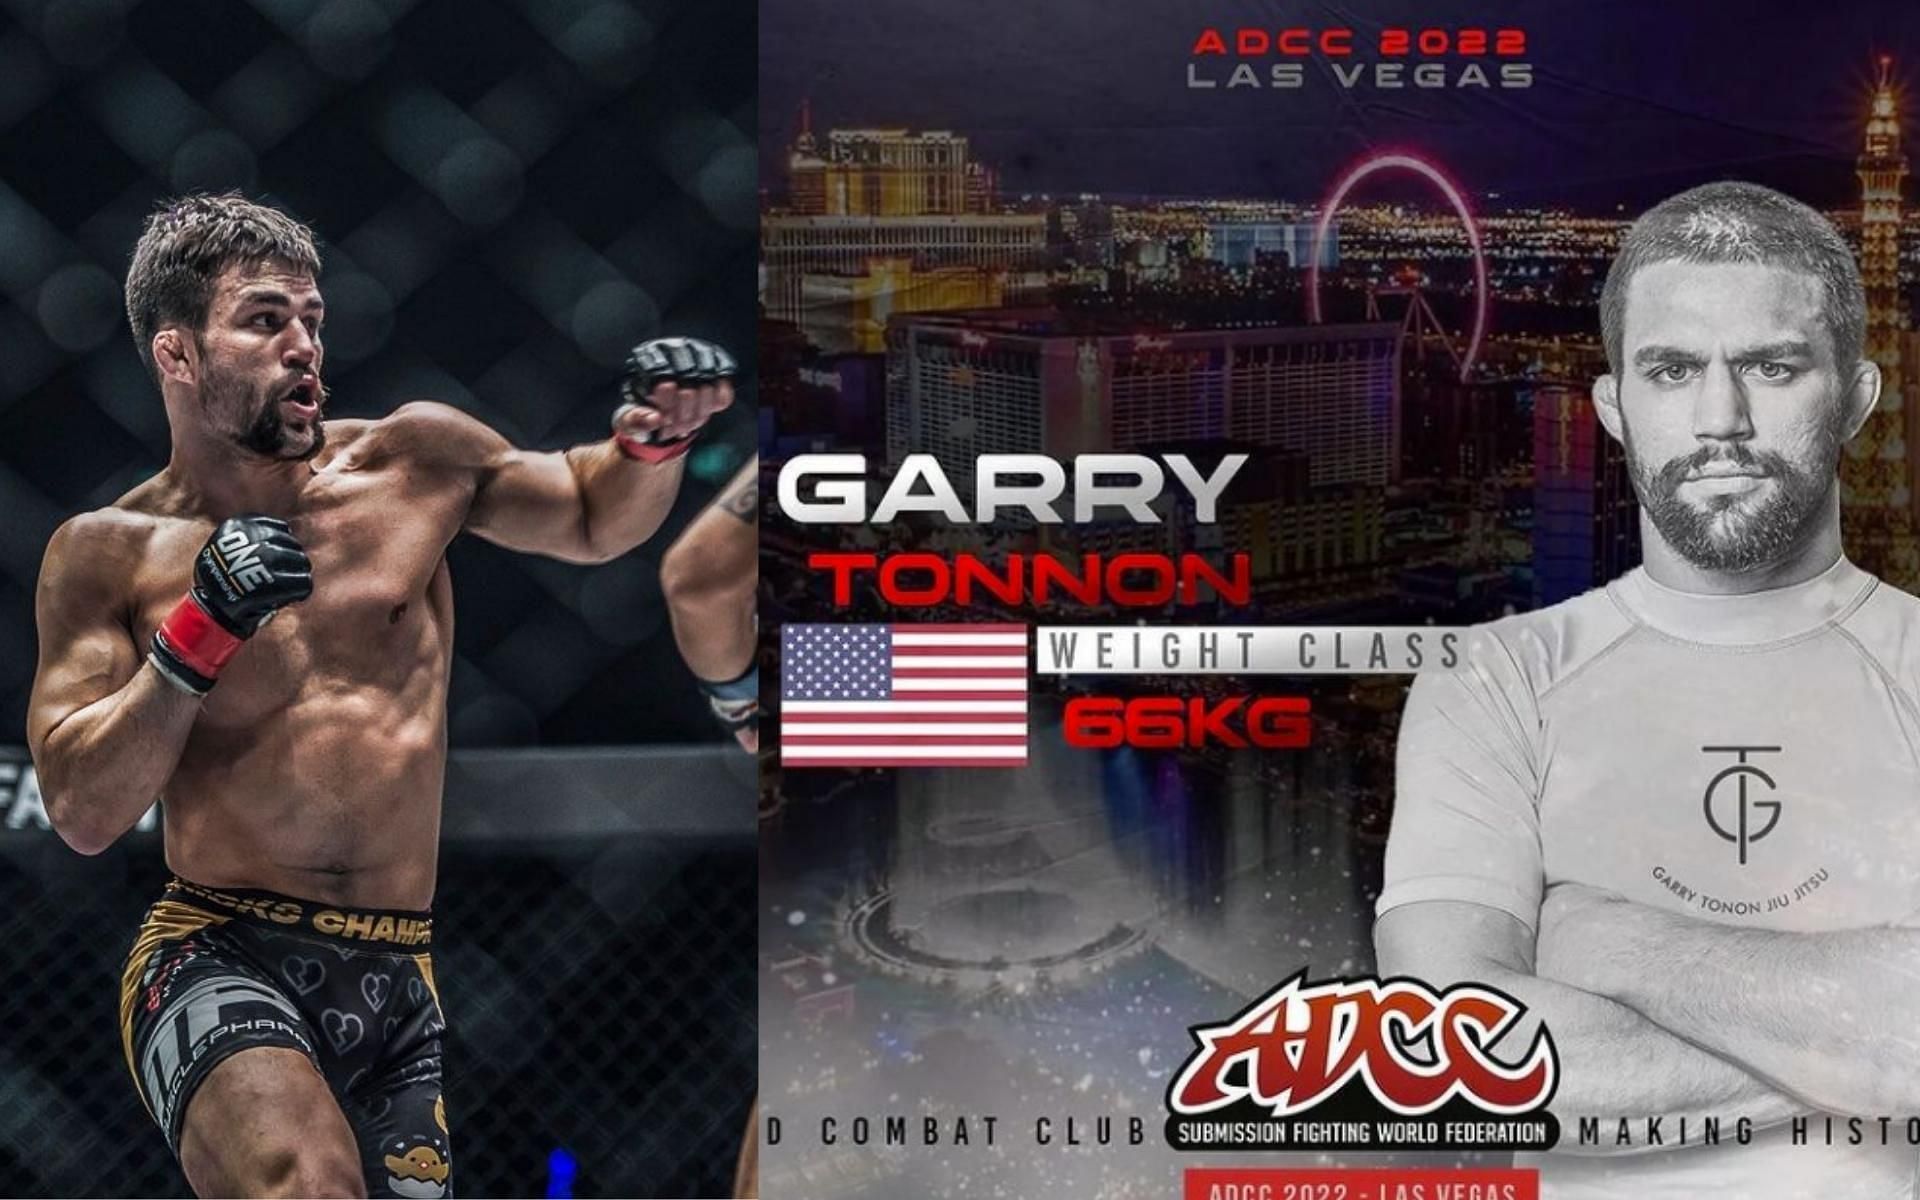 ONE featherweight MMA fighter and grappling icon Garry Tonon will compete in ADCC in Las Vegas this year. (Images courtesy: ONE Championship, @garrytonon on Instagram)